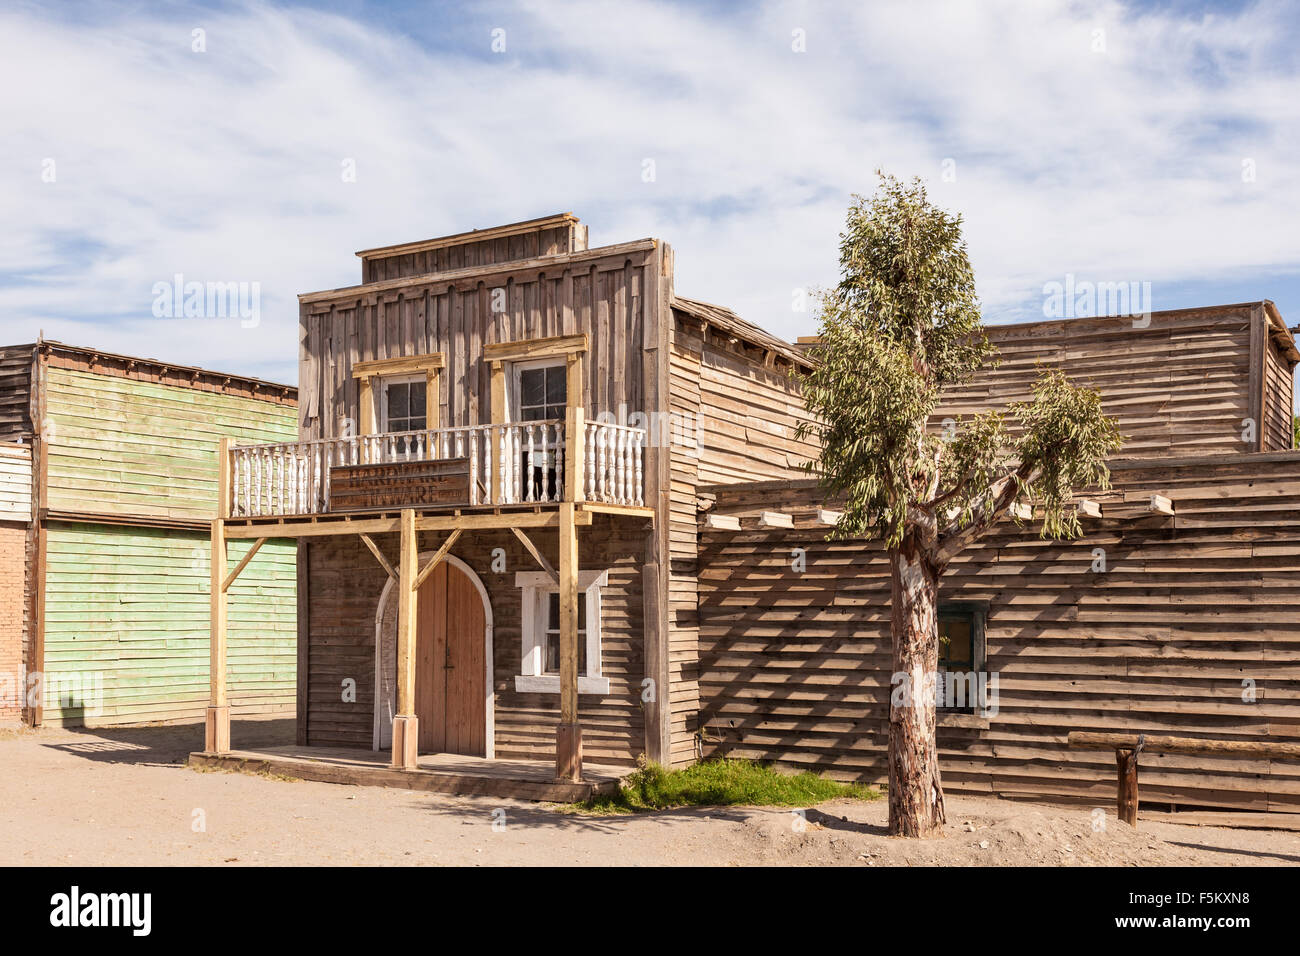 Wooden buildings in an abandoned american ghost town Stock Photo